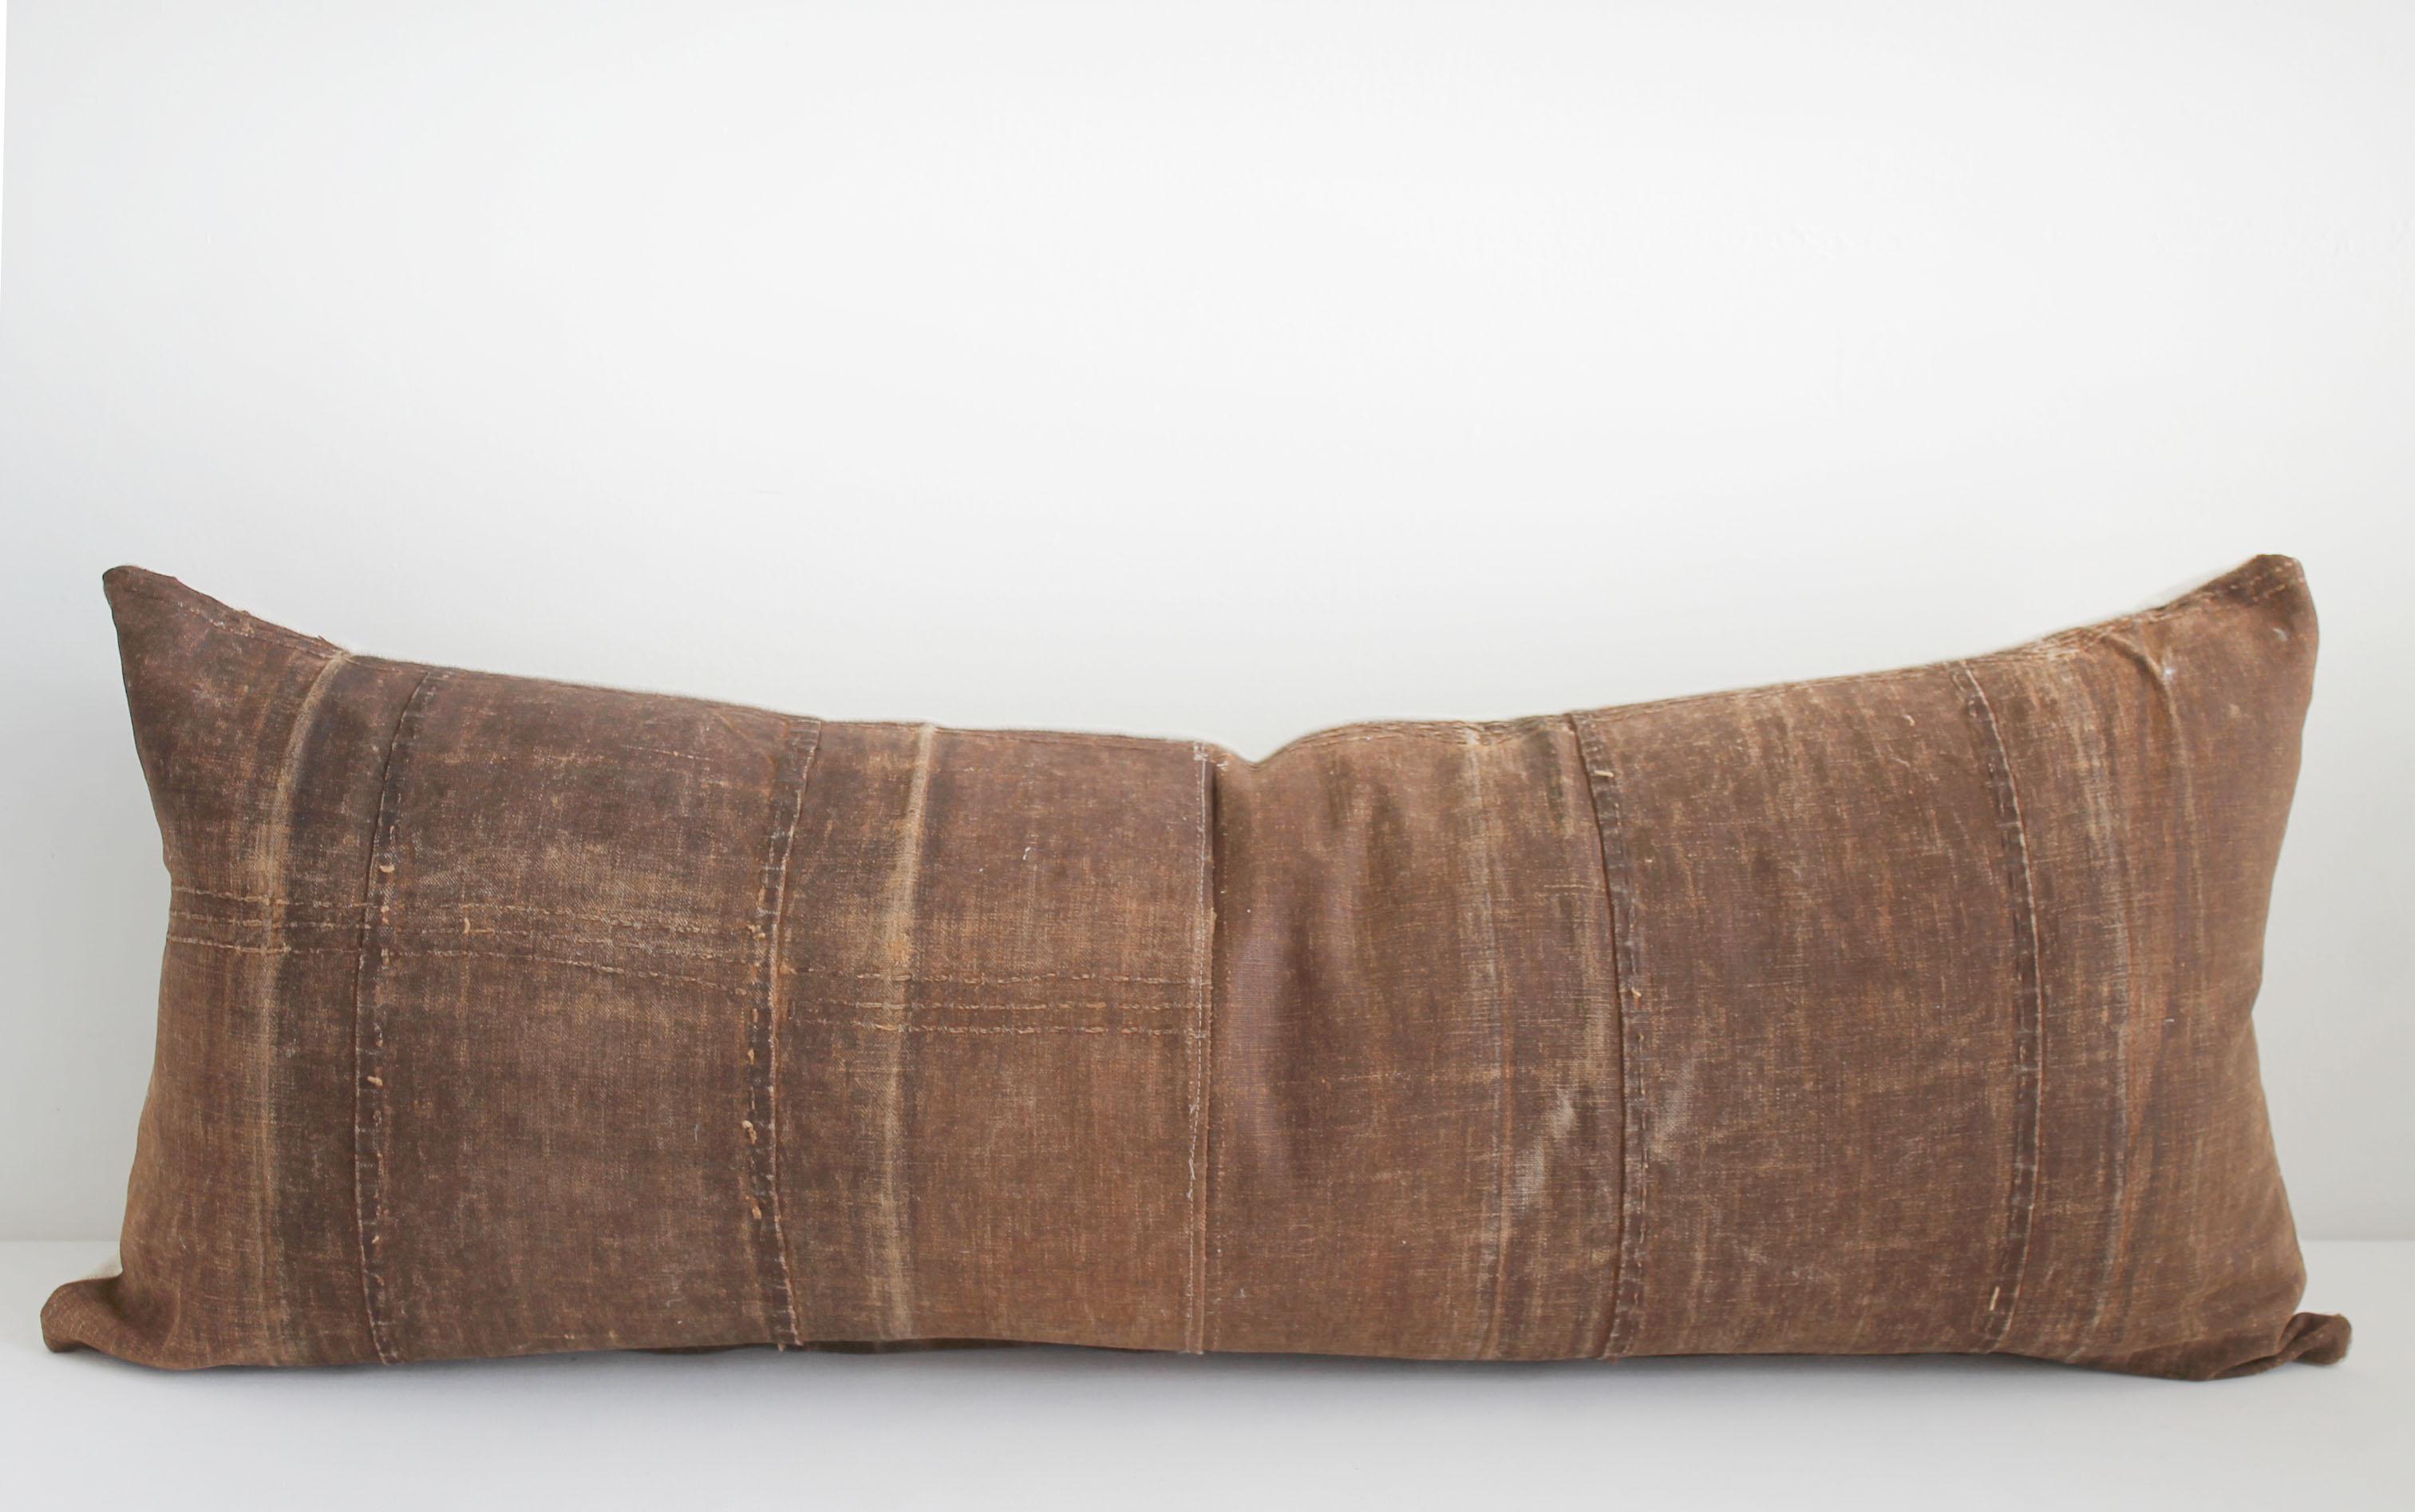 Vintage Japanese sake bottle cover lumbar pillow. Made from old canvas sake bottle covers, in a deep brown, these wonderful patina'd covers have been repurposed into these fabulous lumbar pillows, absolutely one of a kind! Sewn with a zipper